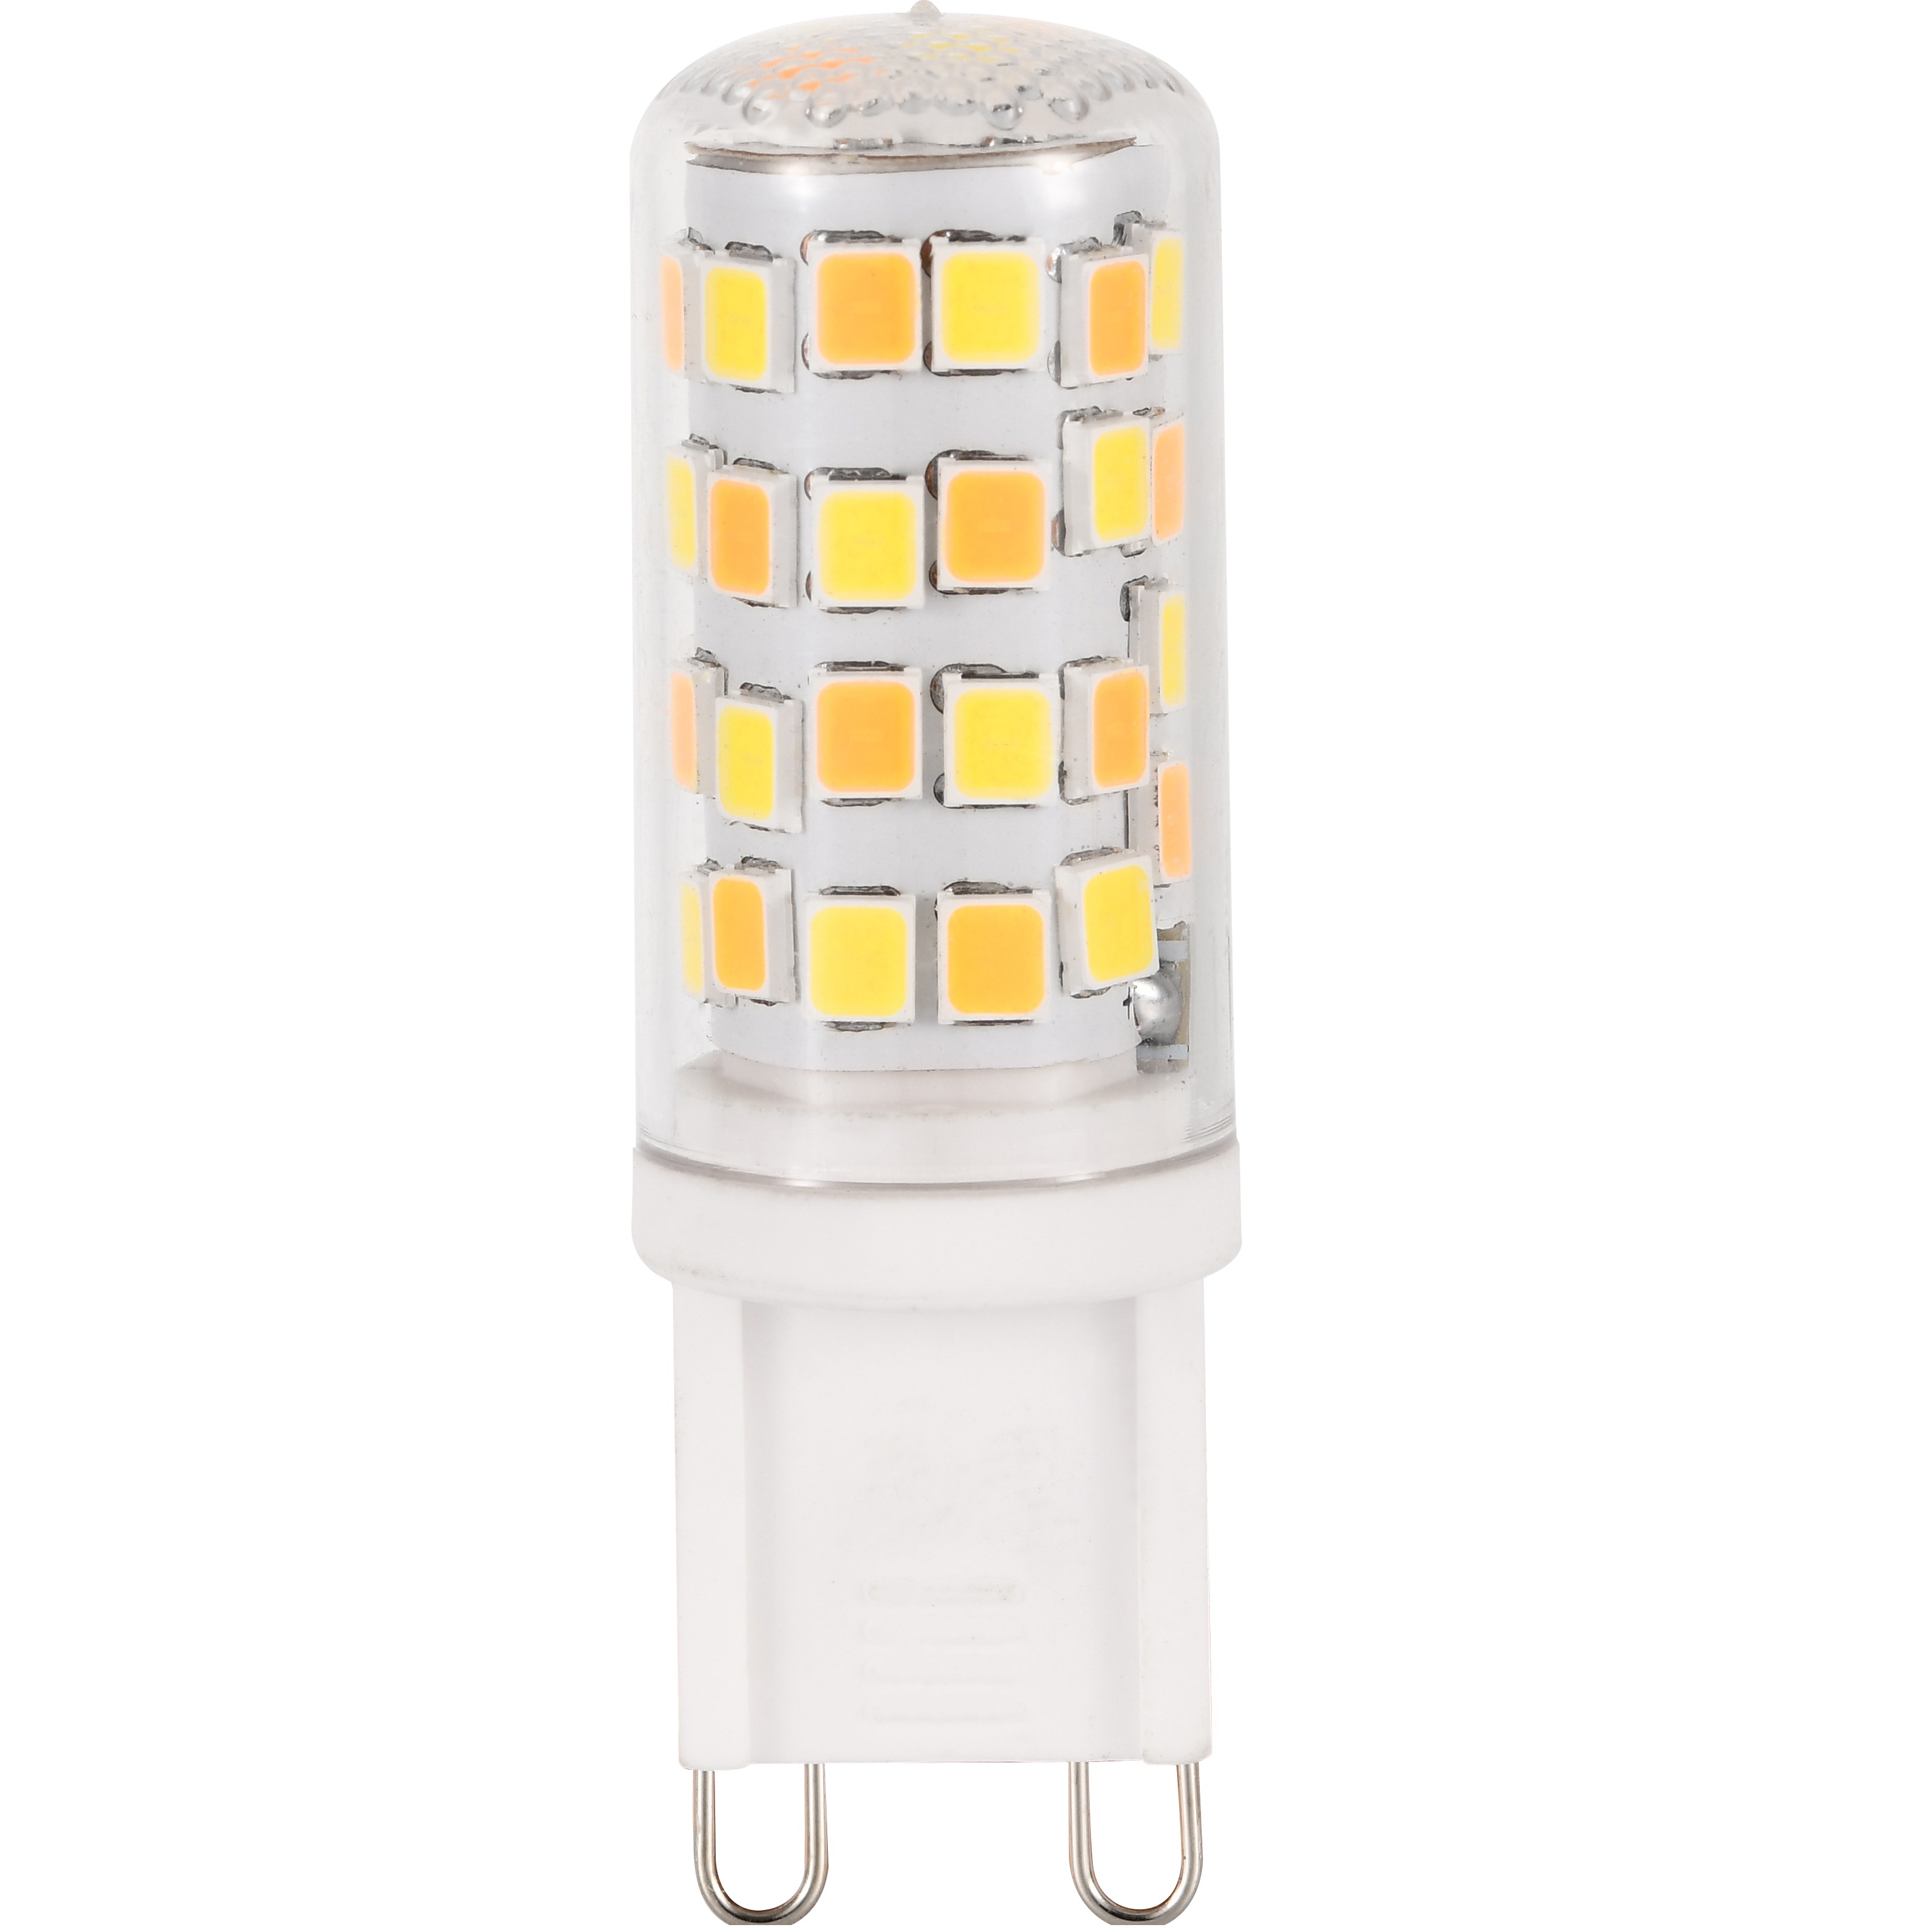 G9 linear 52D two-color ML bulb lamp